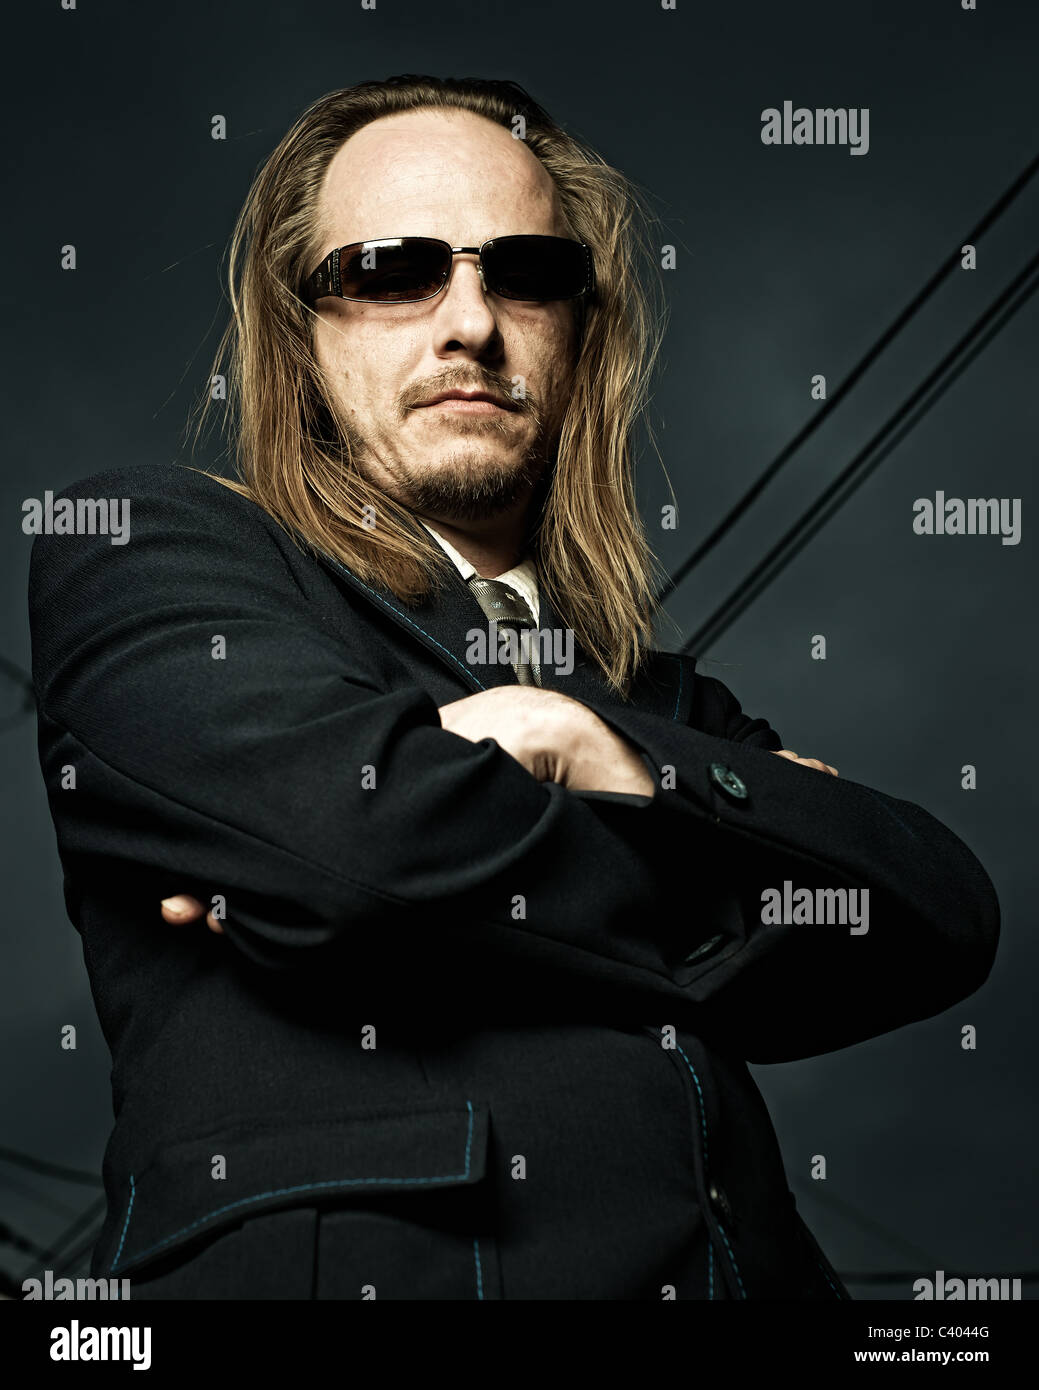 Low perspective shot of a long-haired, balding man standing with his arms crossed. Stock Photo